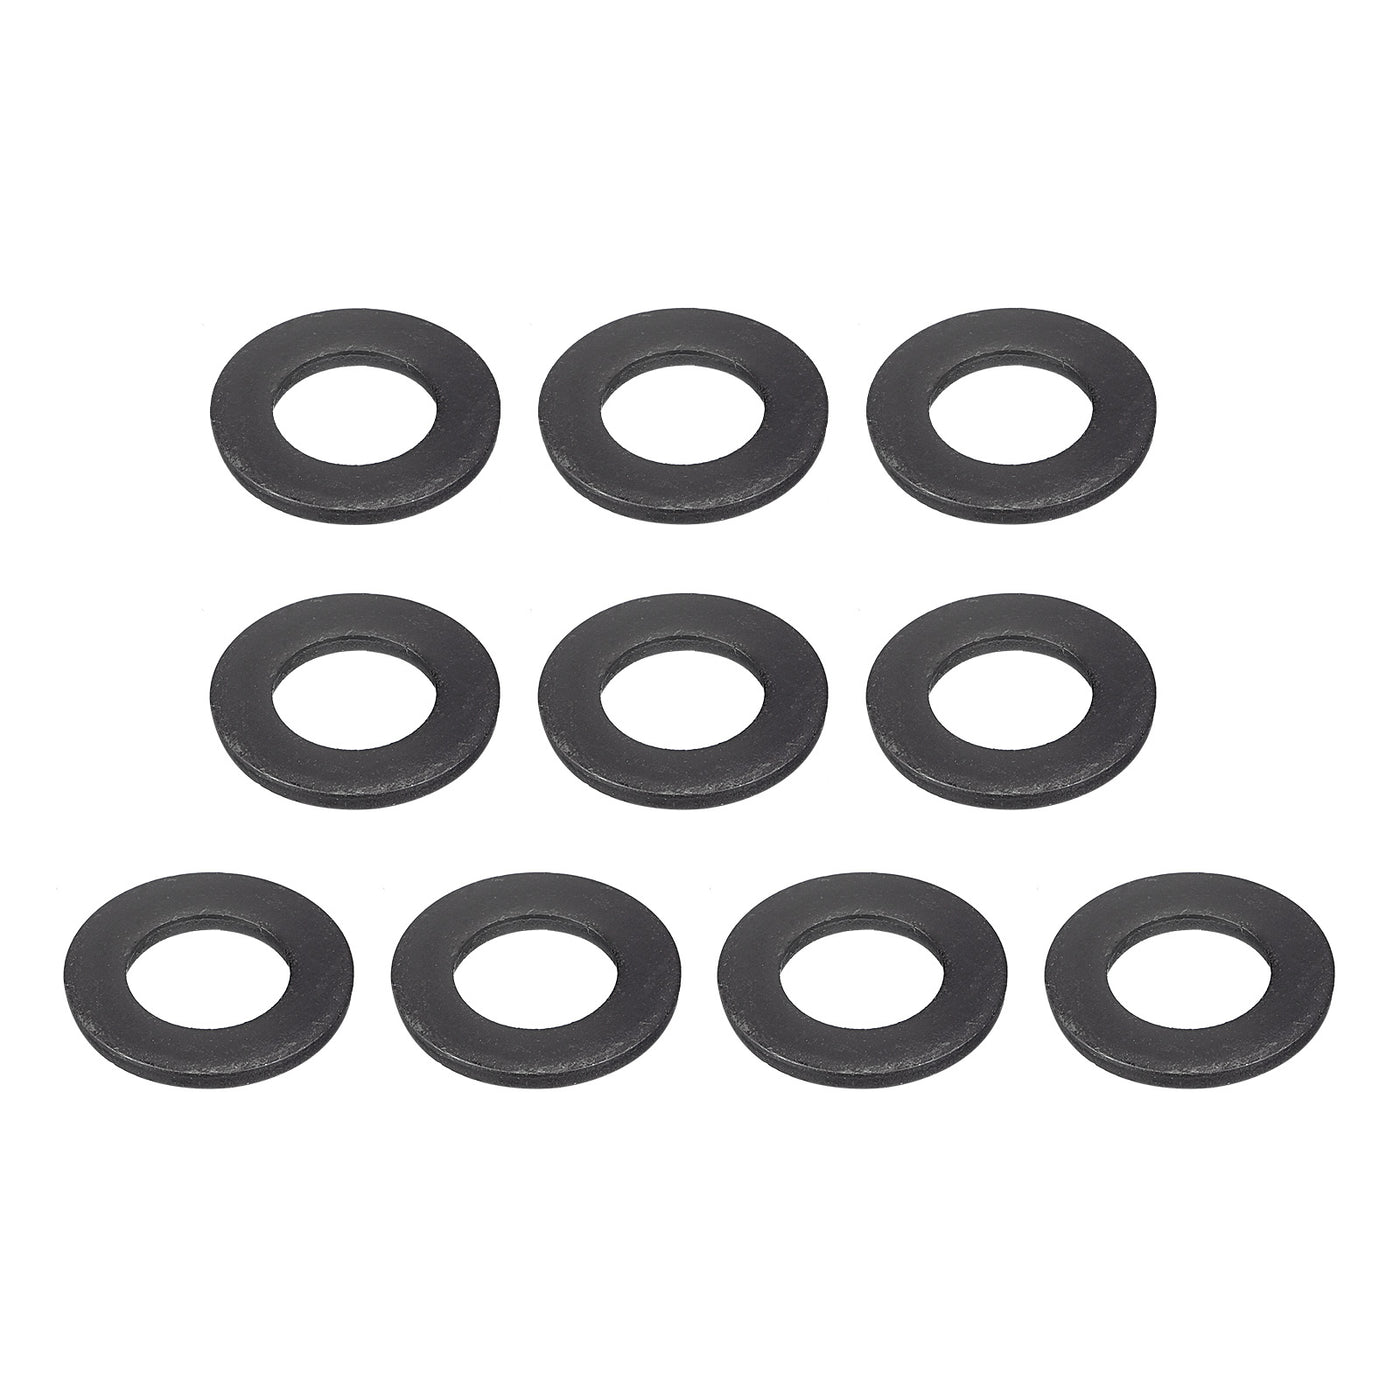 uxcell Uxcell M12 Carbon Steel Flat Washer 25pcs 13x23.5x2.4mm Grade 8.8 Alloy Steel Fasteners